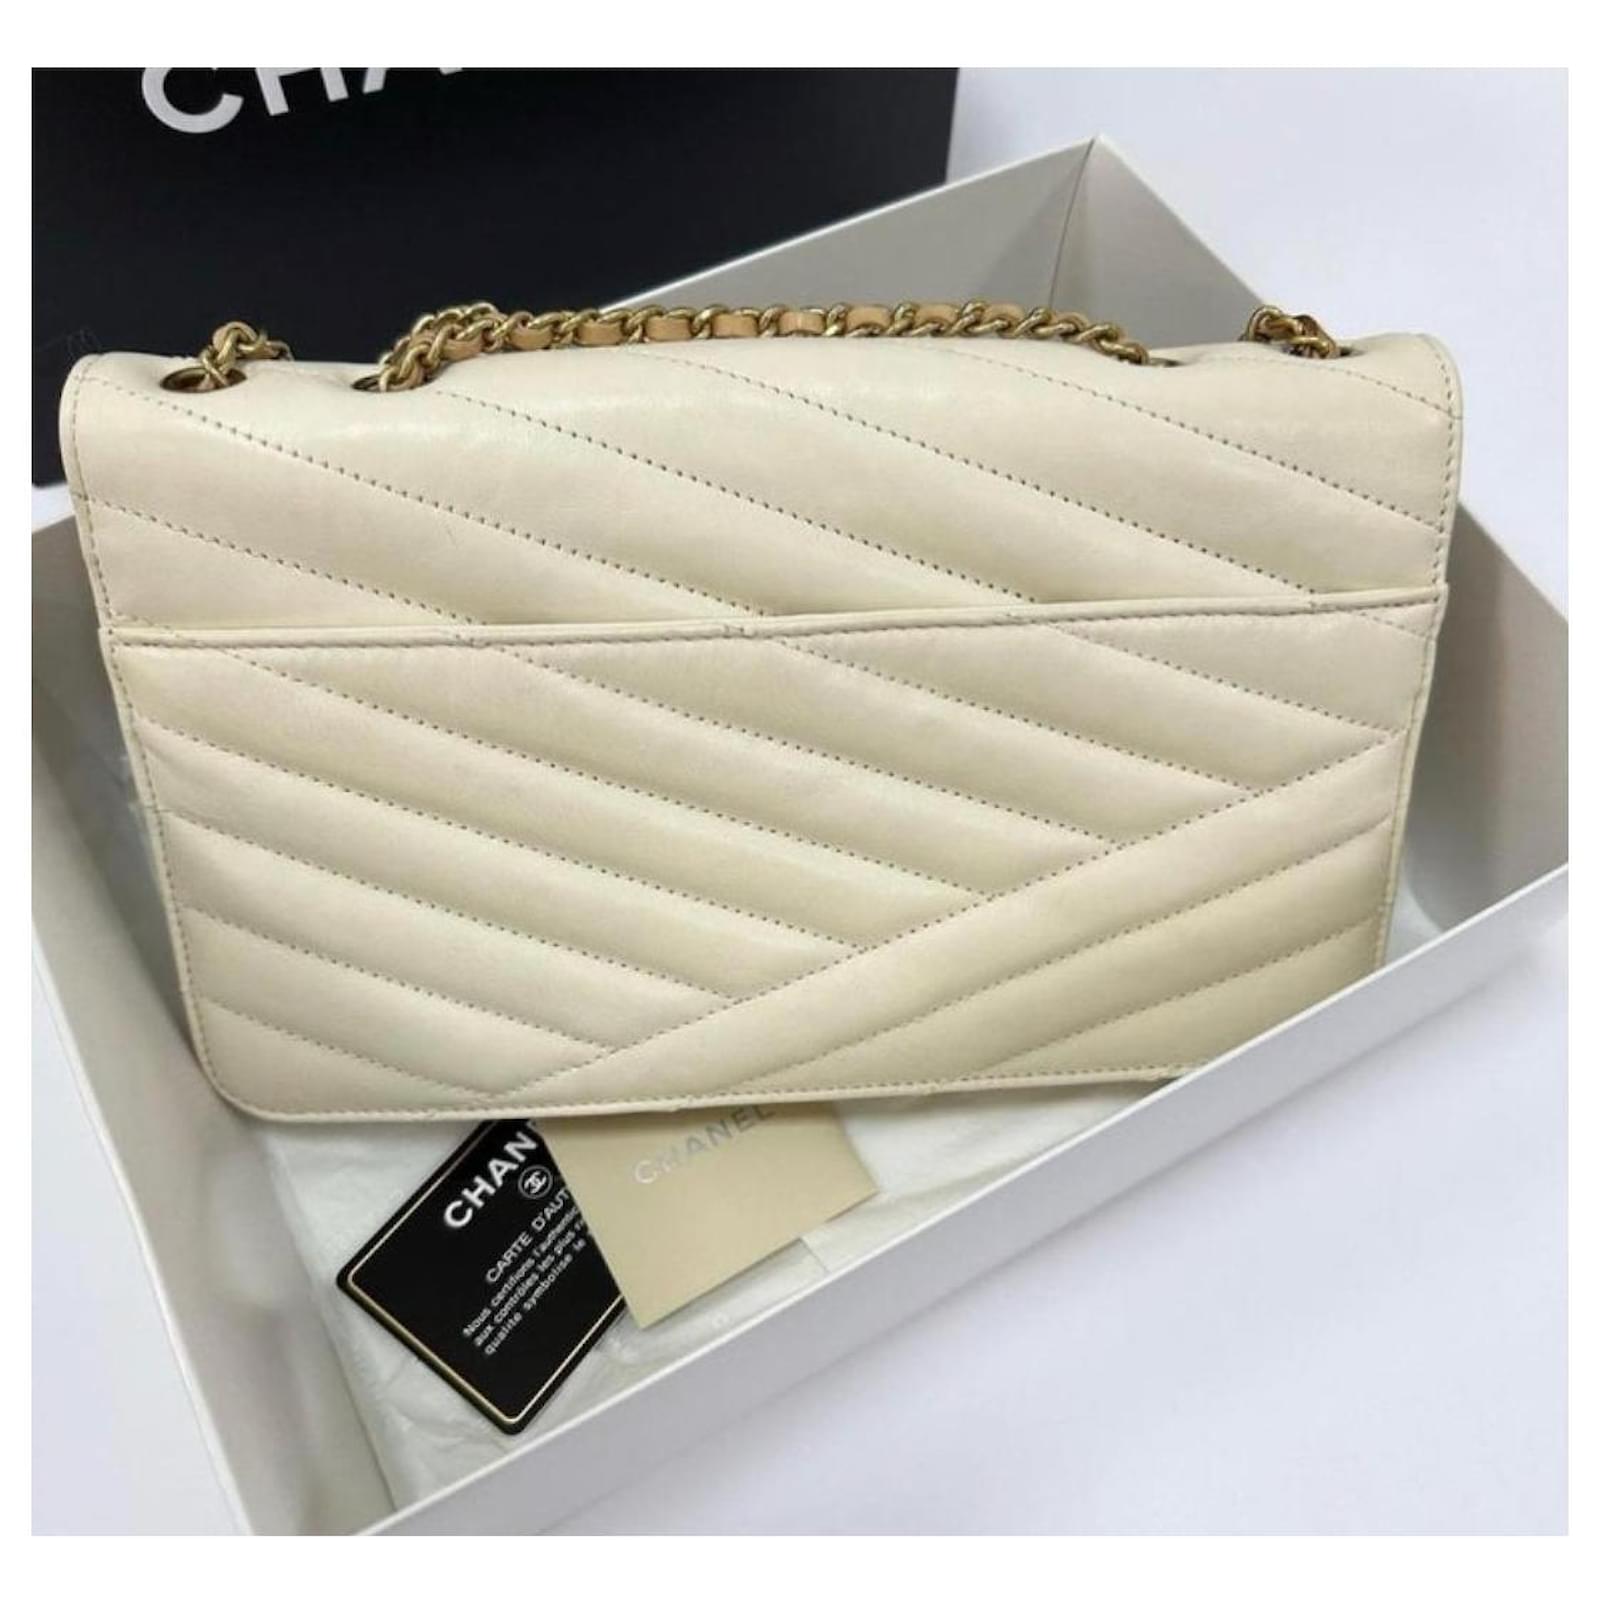 Handbags Chanel New Chanel Handbag with Flap Timeless Bandouliere Leather Chevron Rouge Bag